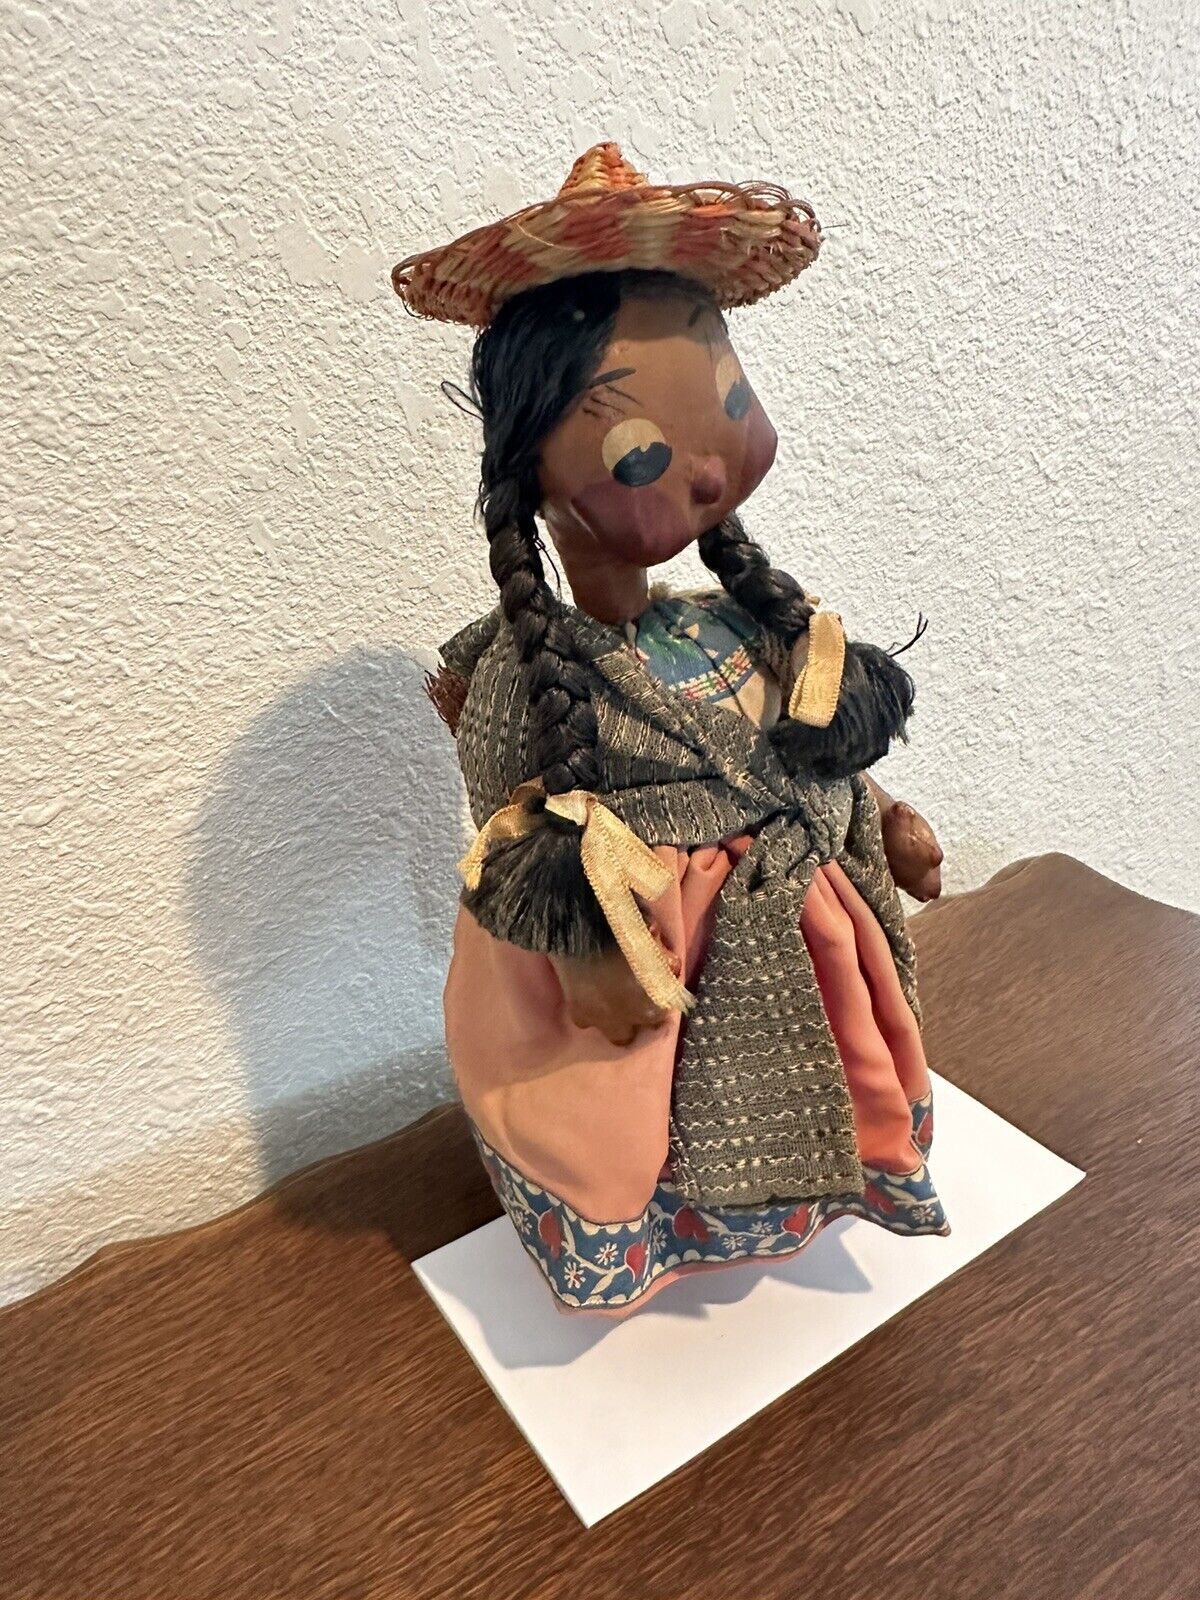 Authentic Vintage Mexican Baby Doll With Hinged Arms And Leather Huaraches.